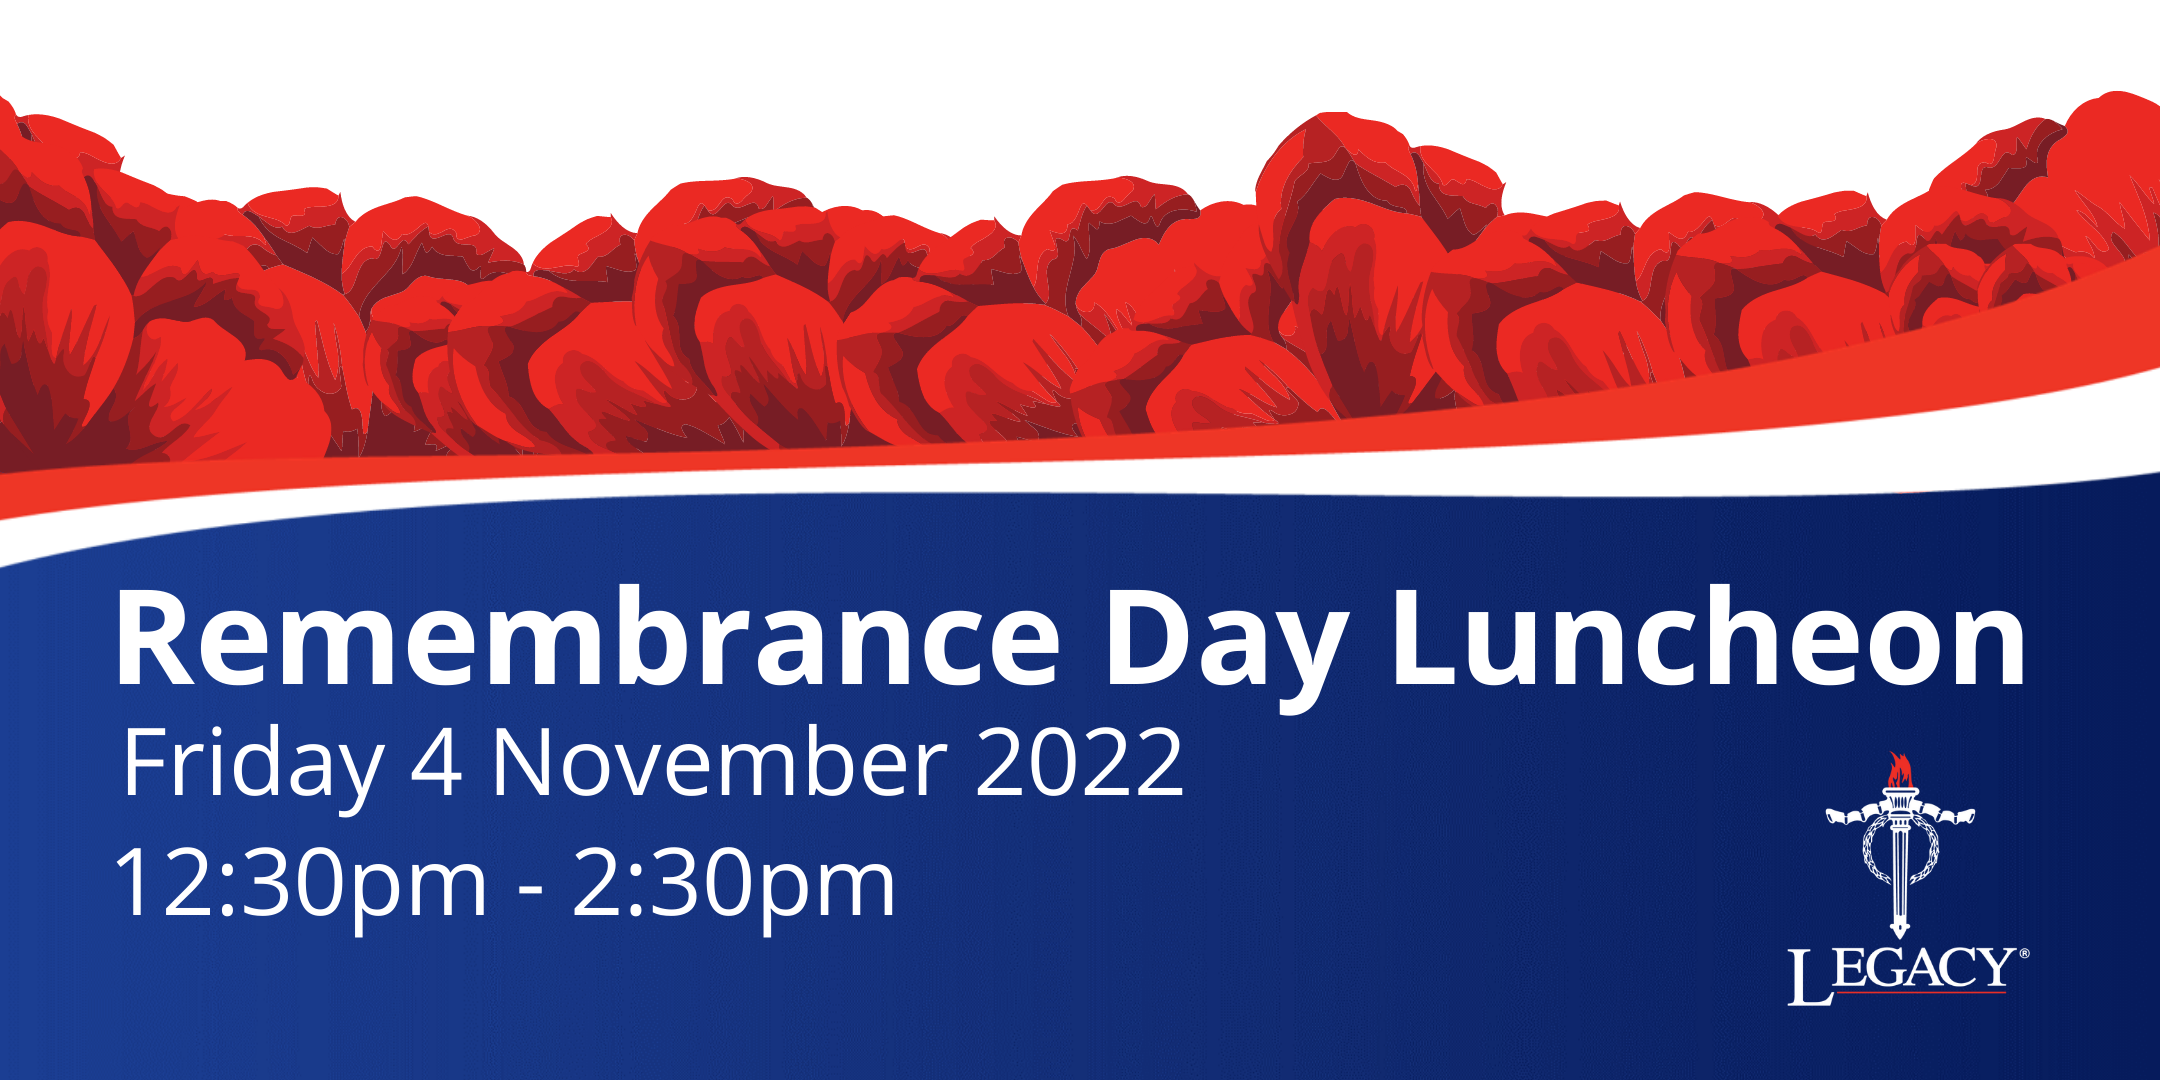 Legacy Remembrance Day Luncheon 2022